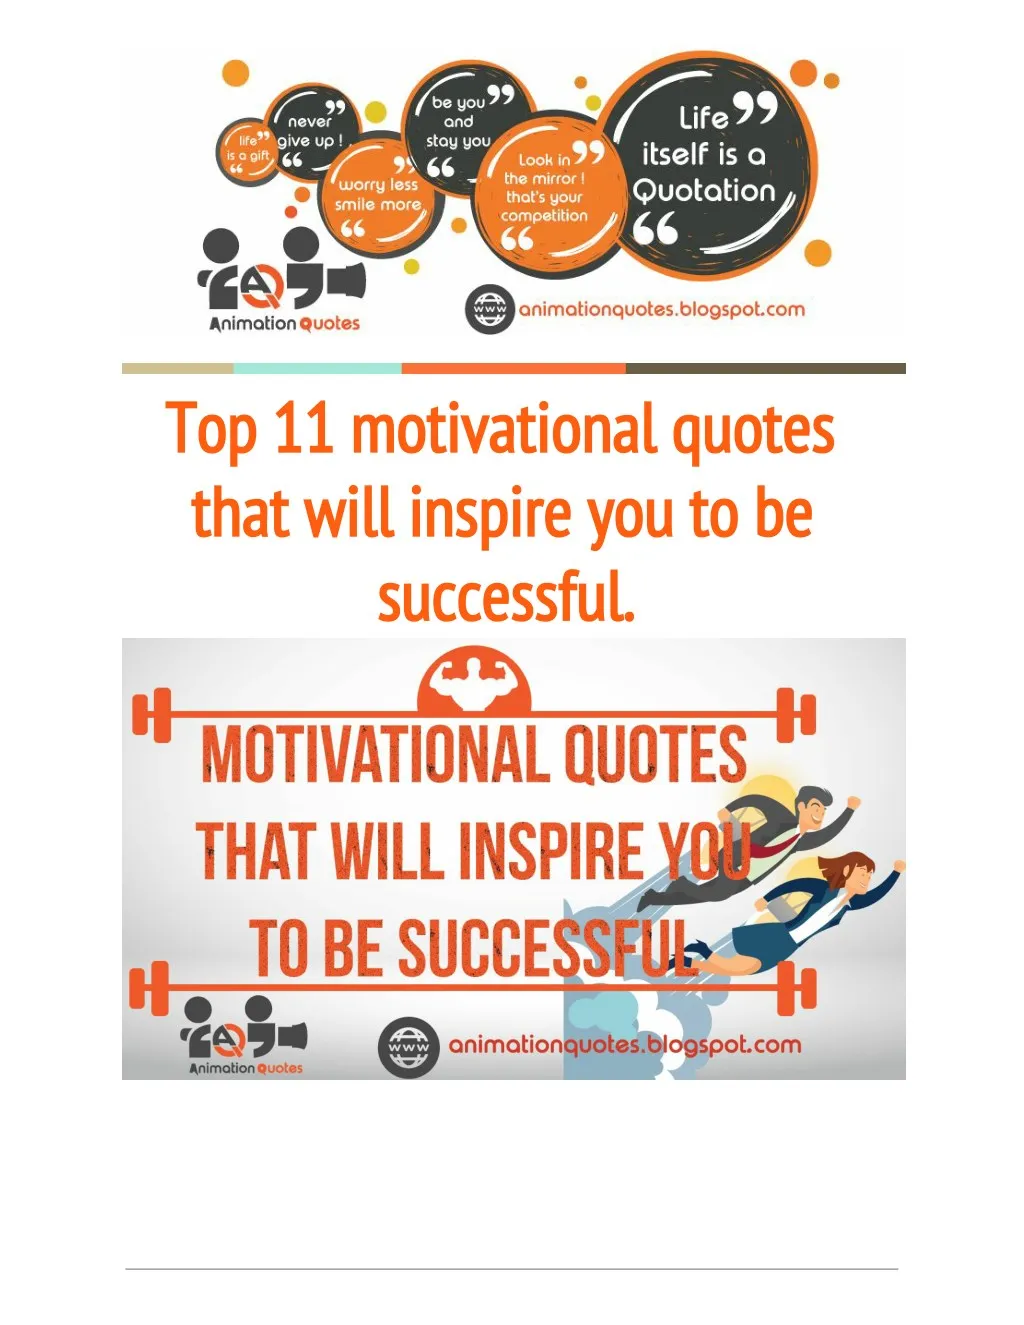 PPT - Top 11 Motivational Quotes That Will Inspire You to Be Successful